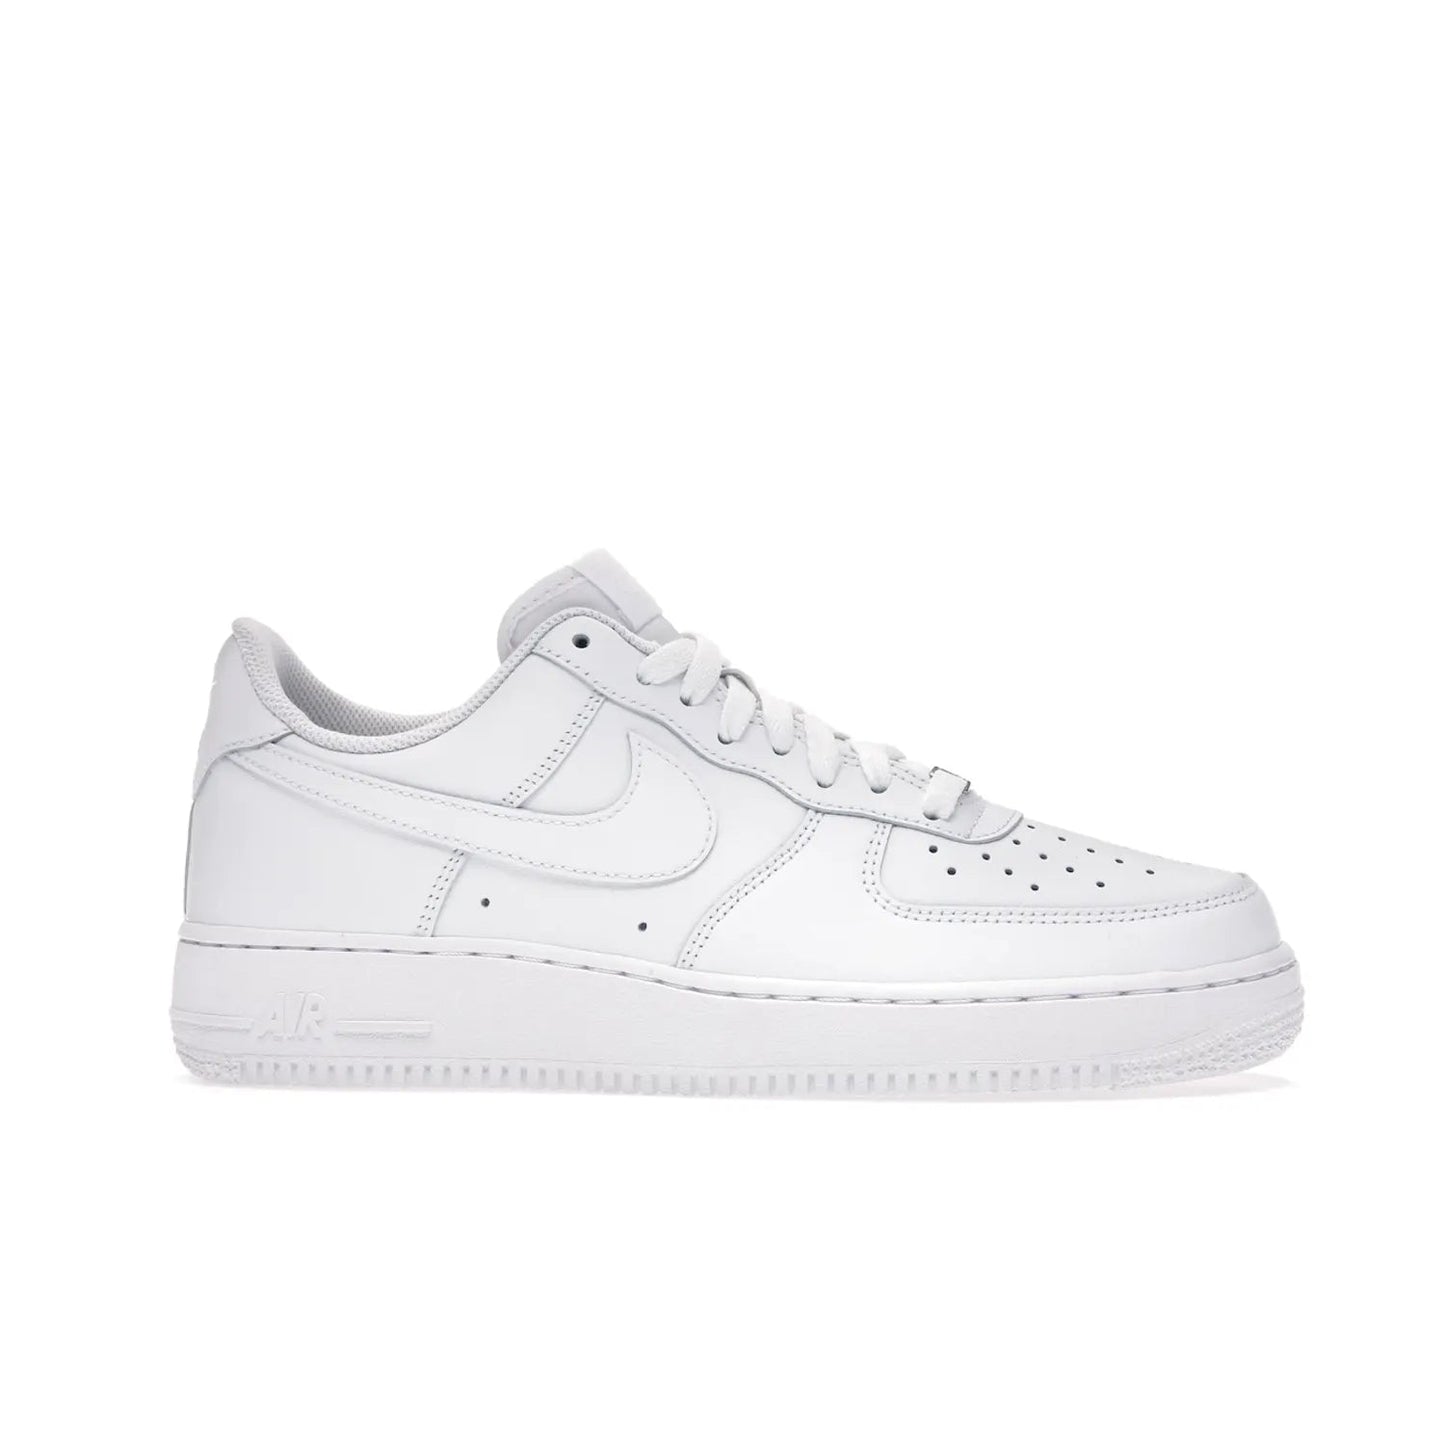 Nike Air Force 1 Low '07 White - Image 2 - Only at www.BallersClubKickz.com - ##
Iconic Swoosh overlays and crisp white sole make the classic Nike Air Force 1 Low White '07 an essential colorway. Classic for seasoned heads and new fans alike.